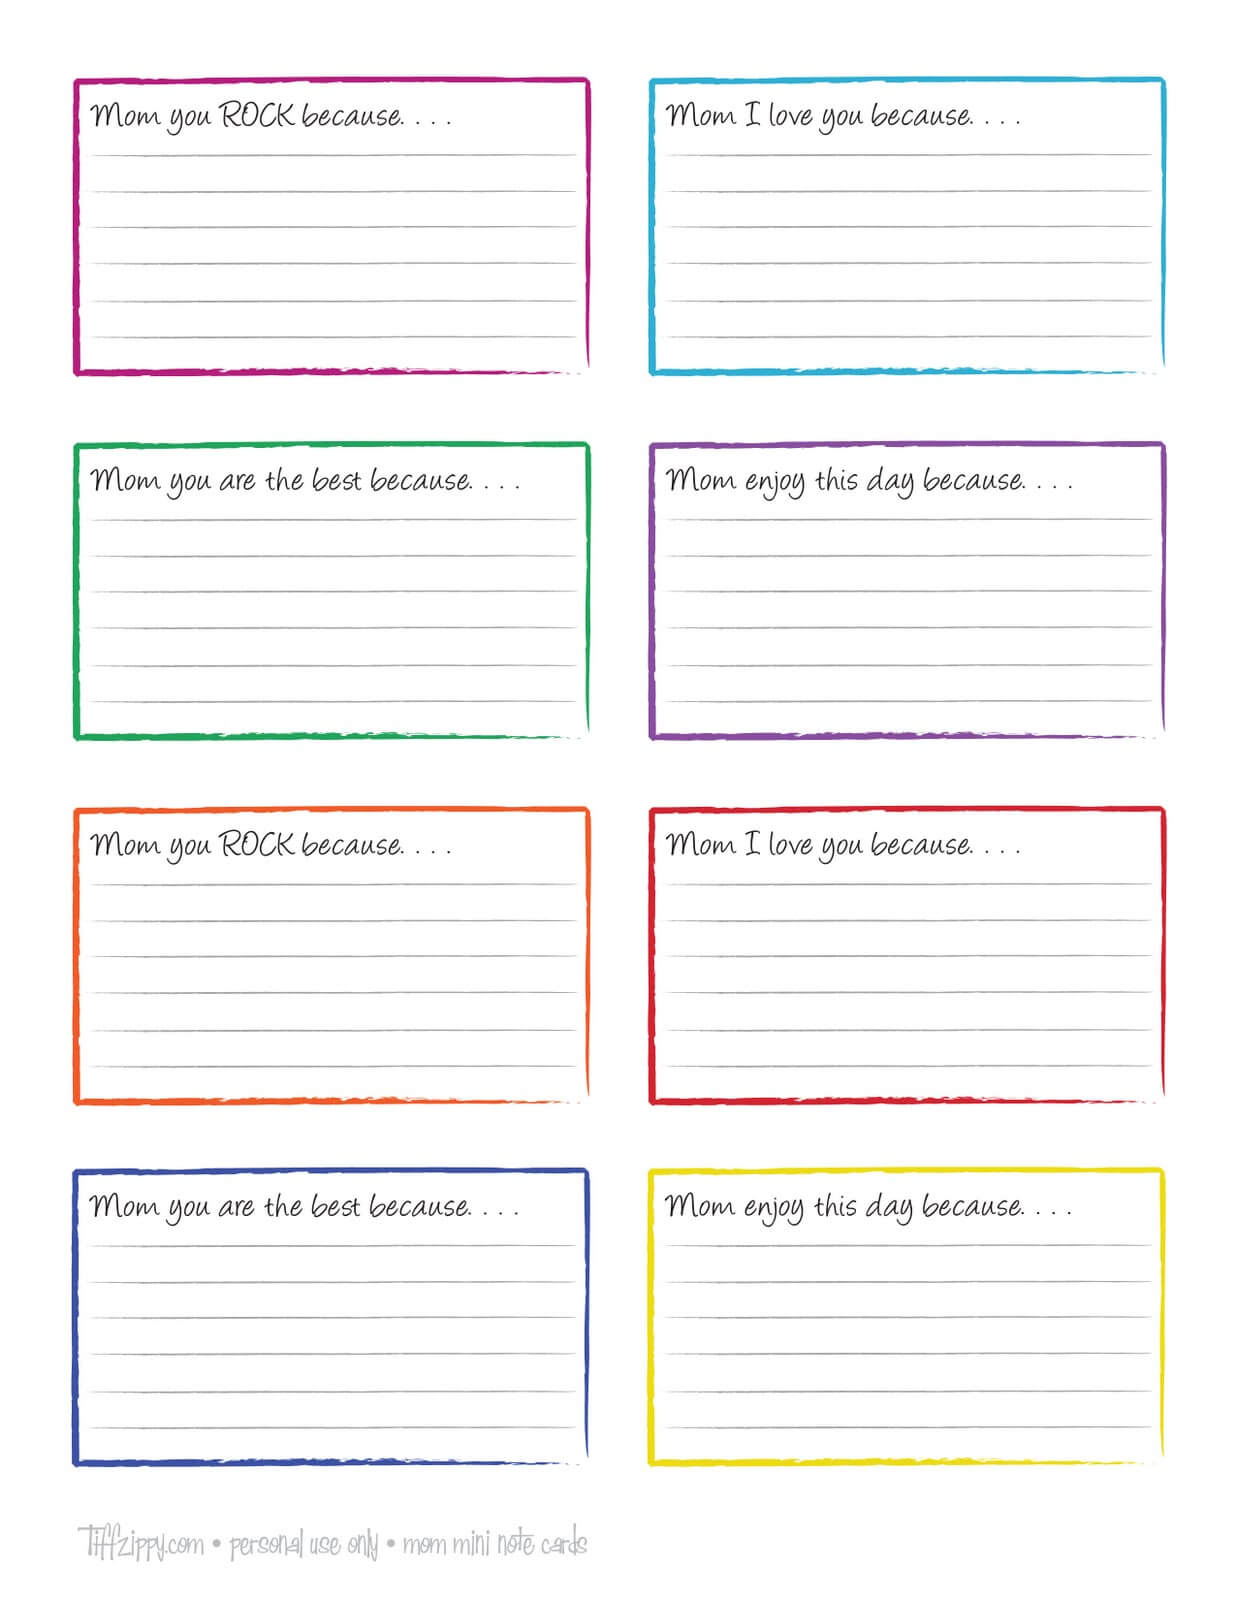 013 Examples Of Notecards For Research Paper Placement 3X5 Regarding 3X5 Note Card Template